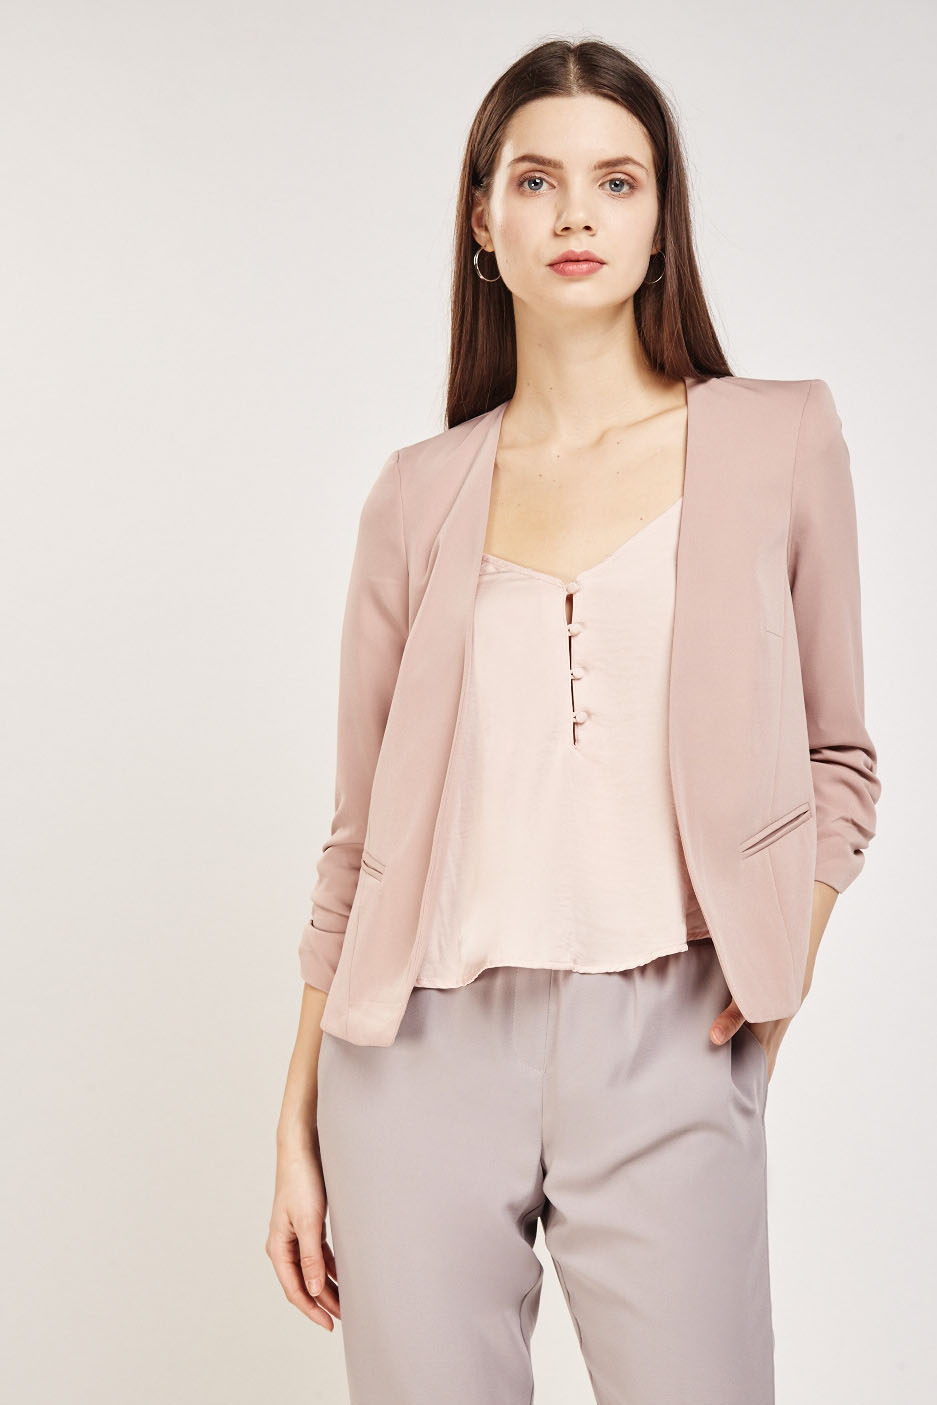 Ruched Sleeve Dusty Pink Blazer - Just $7